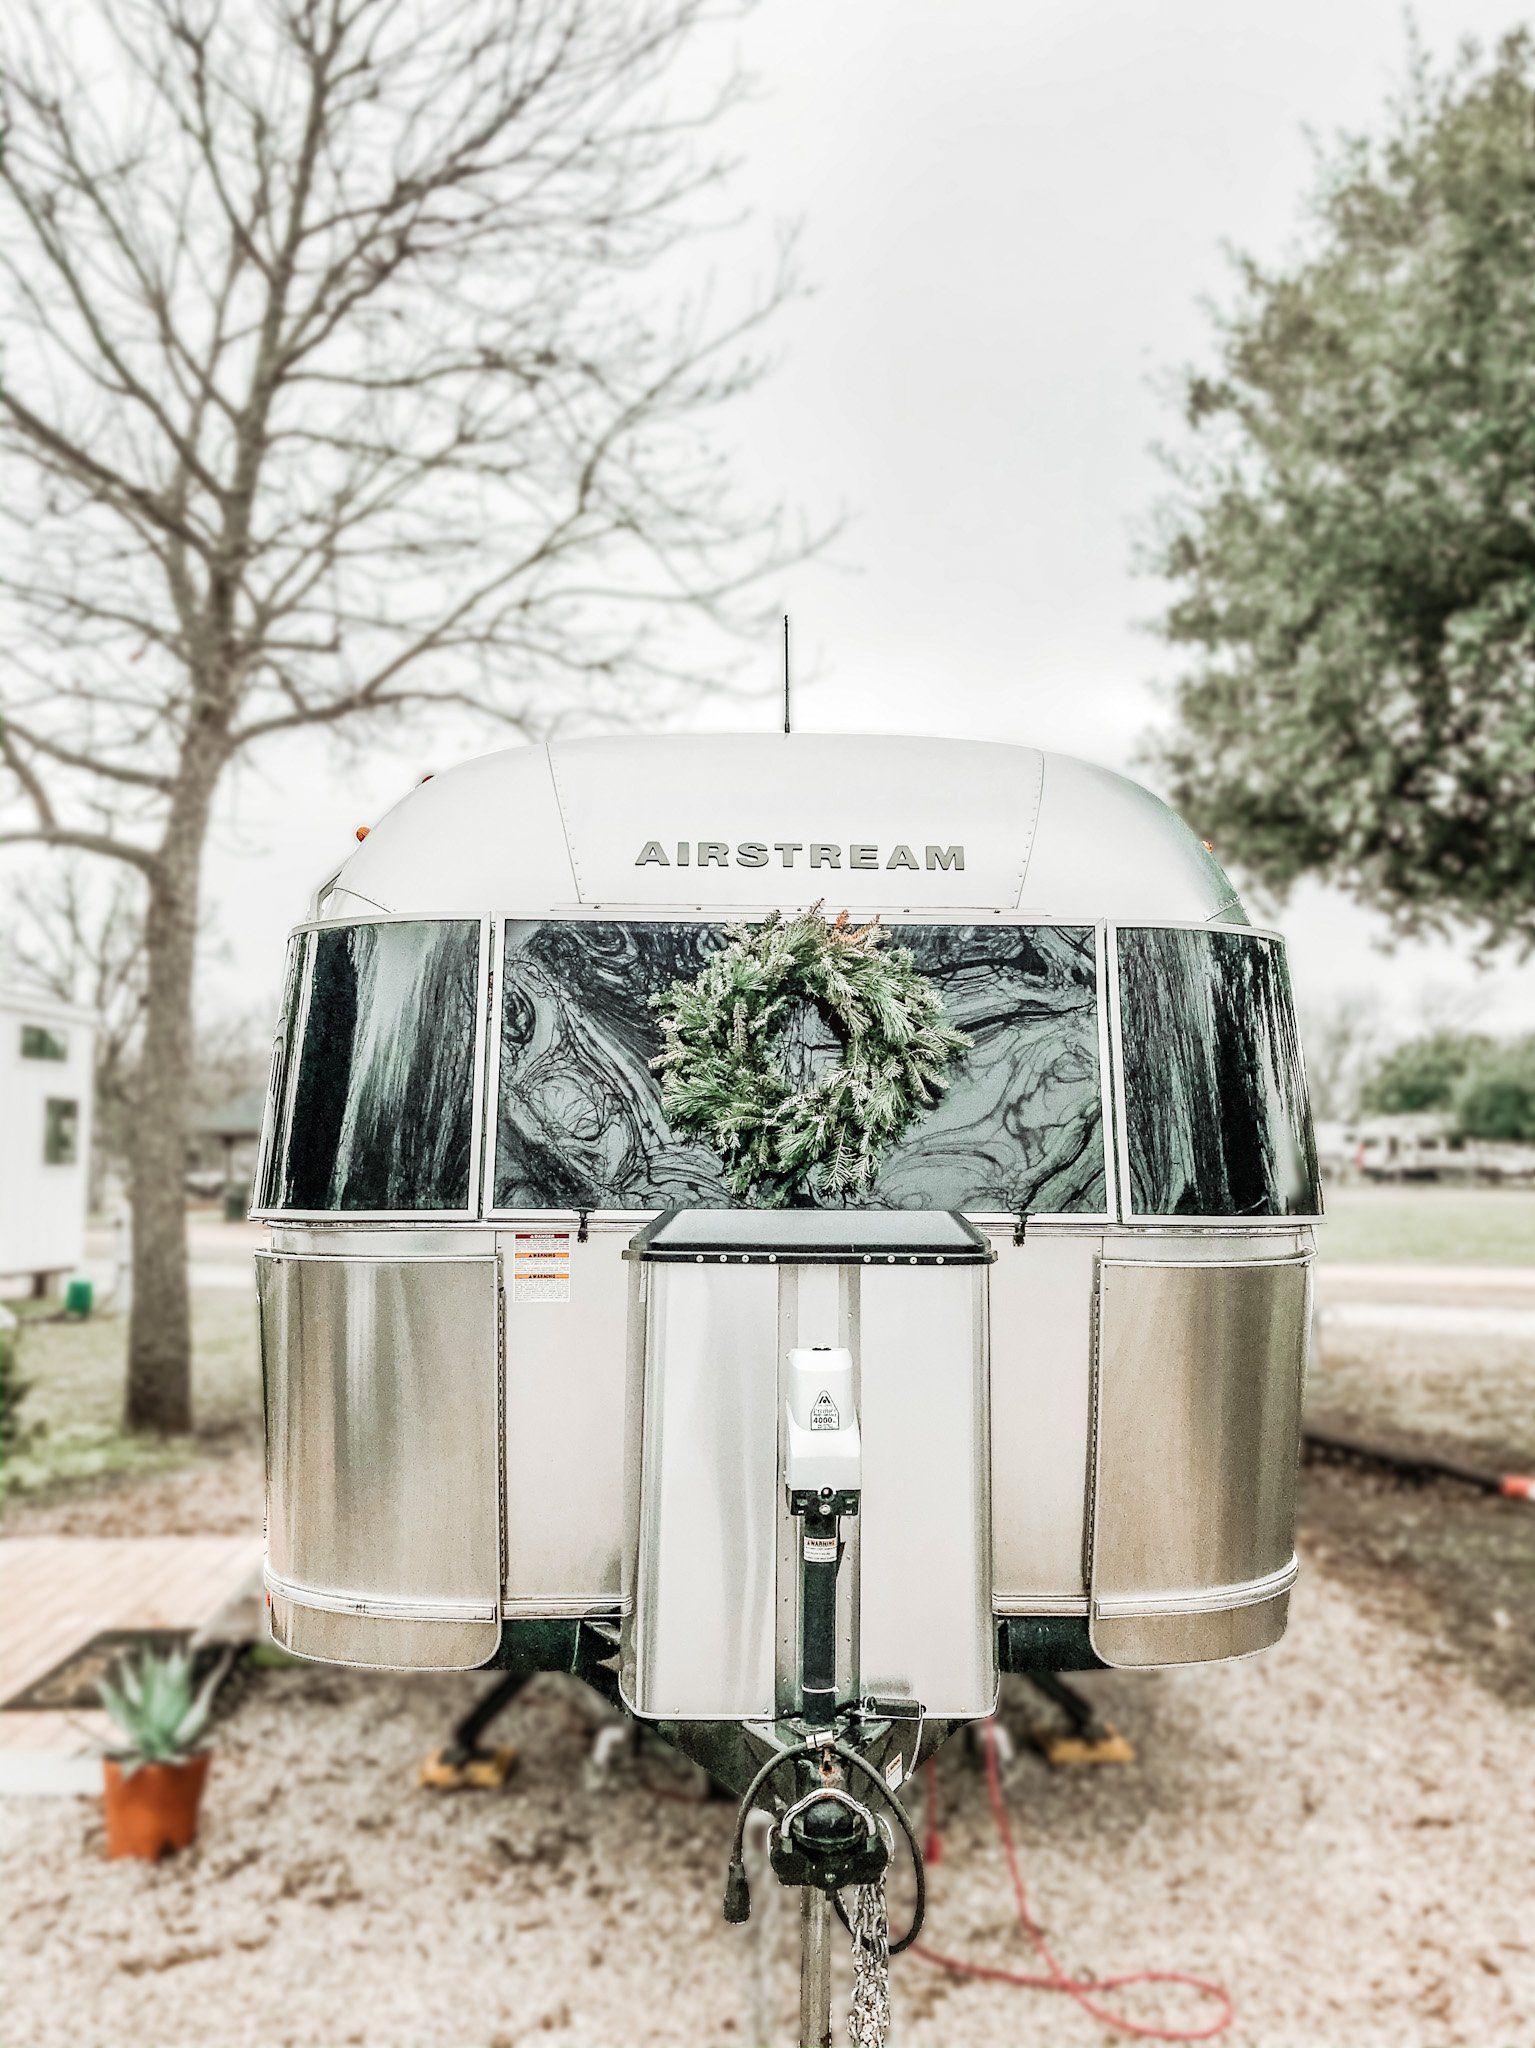 Airstream decorated for Christmas with holiday wreath